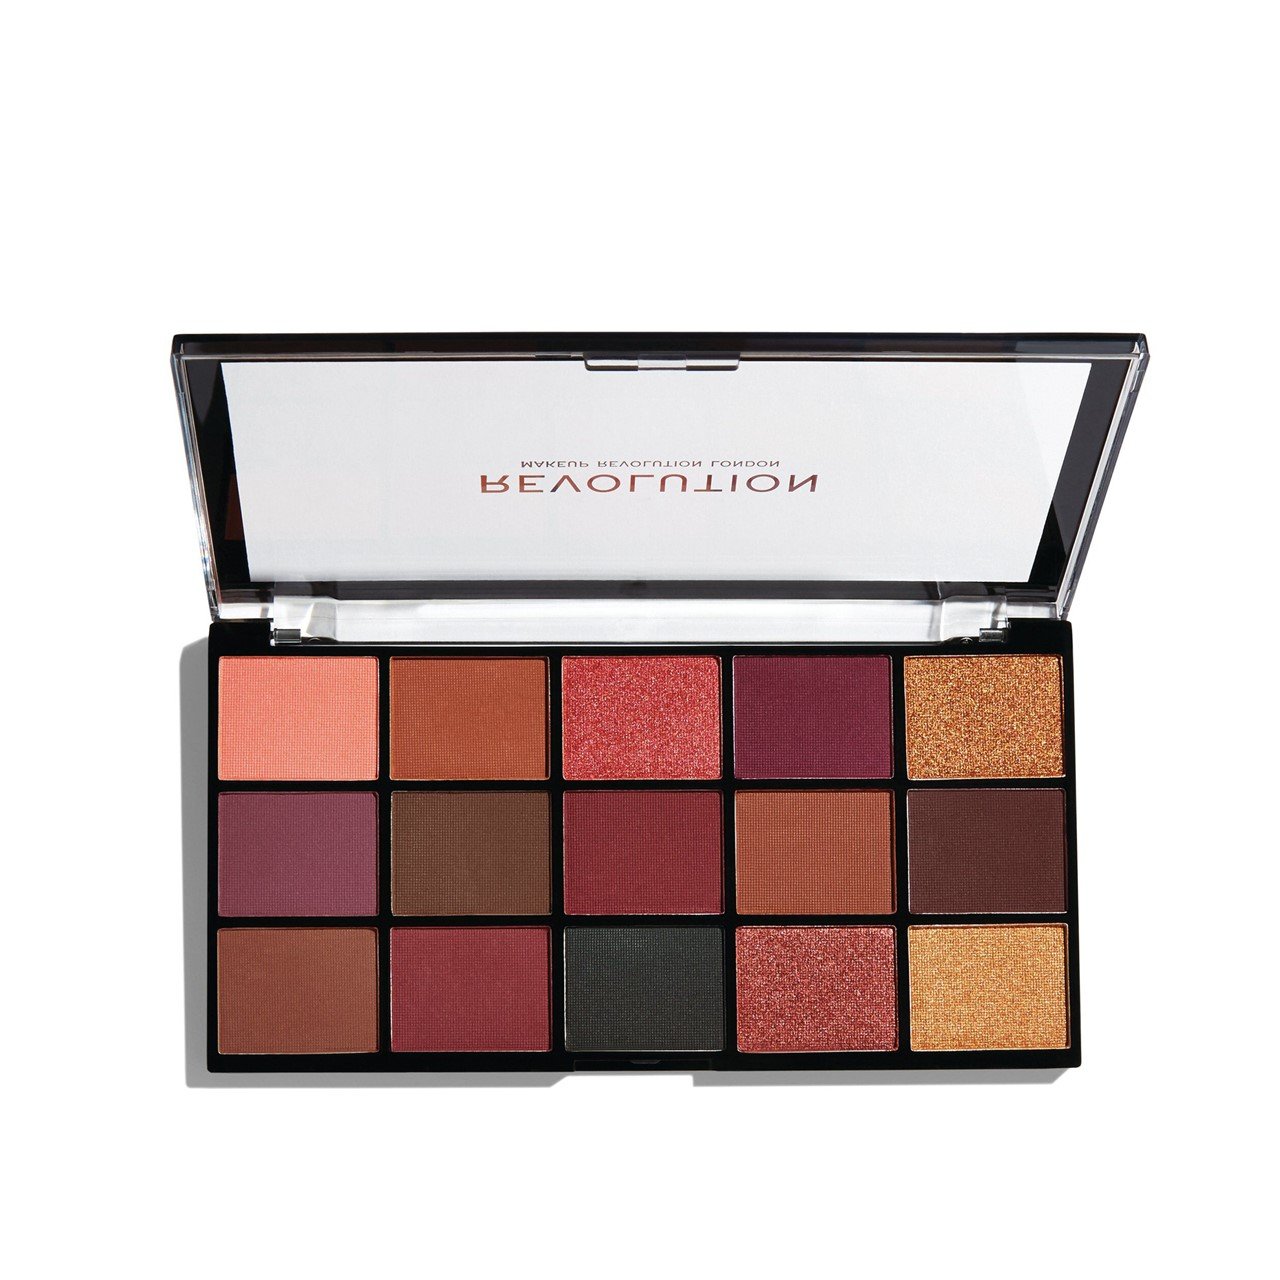 https://static.beautytocare.com/cdn-cgi/image/width=1600,height=1600,f=auto/media/catalog/product//m/a/makeup-revolution-reloaded-eyeshadow-palette-newtrals-3-1-1g-x15.jpg